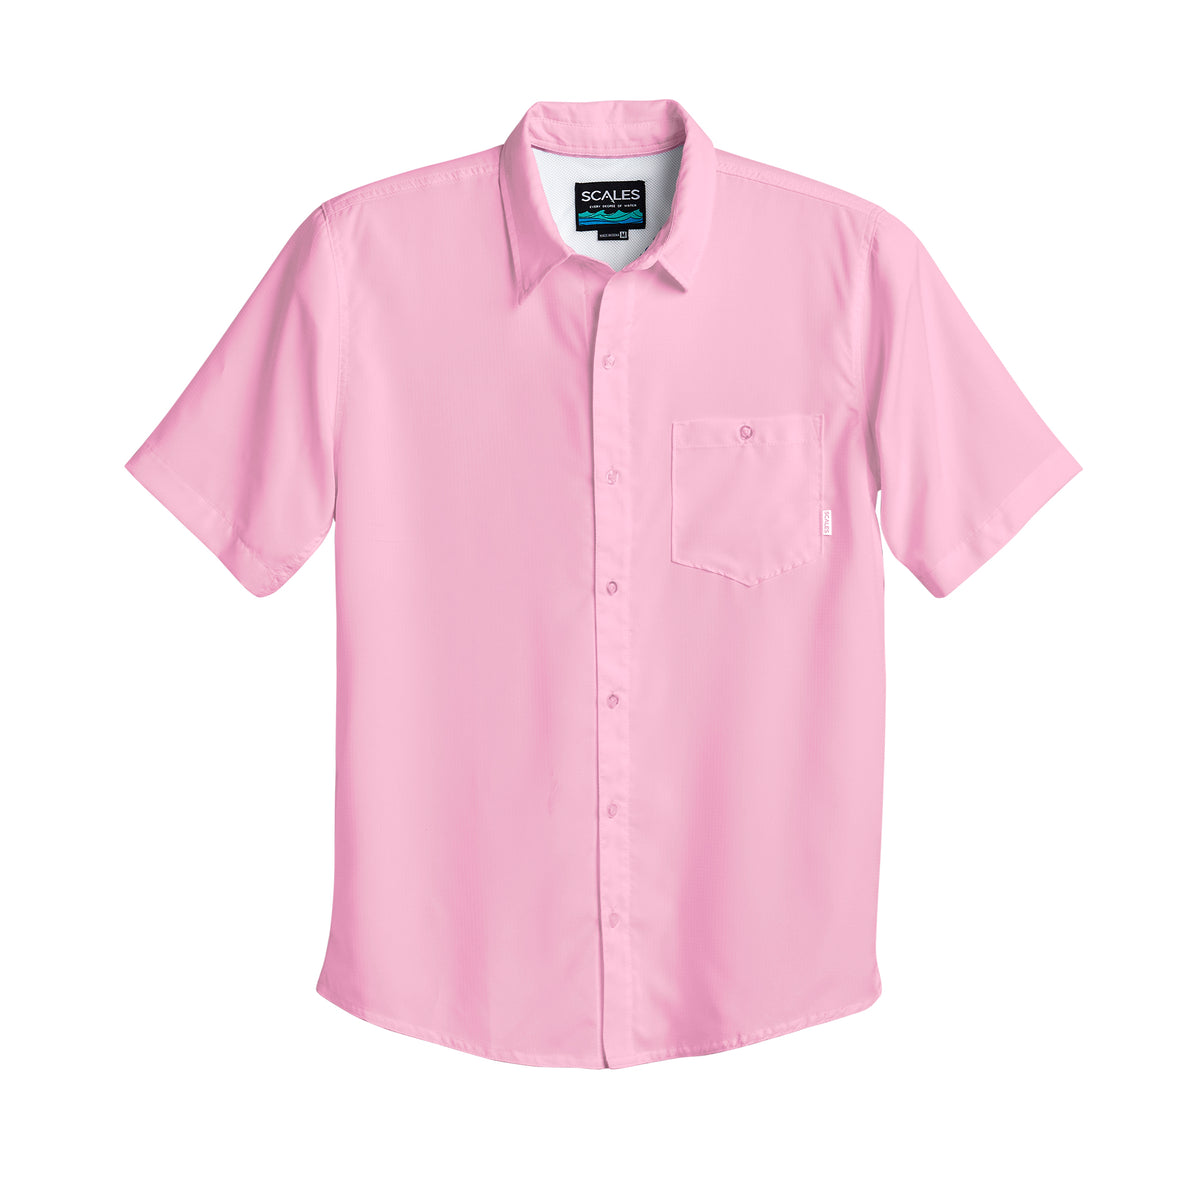 Offshore Core Button Down - Light Pink / S